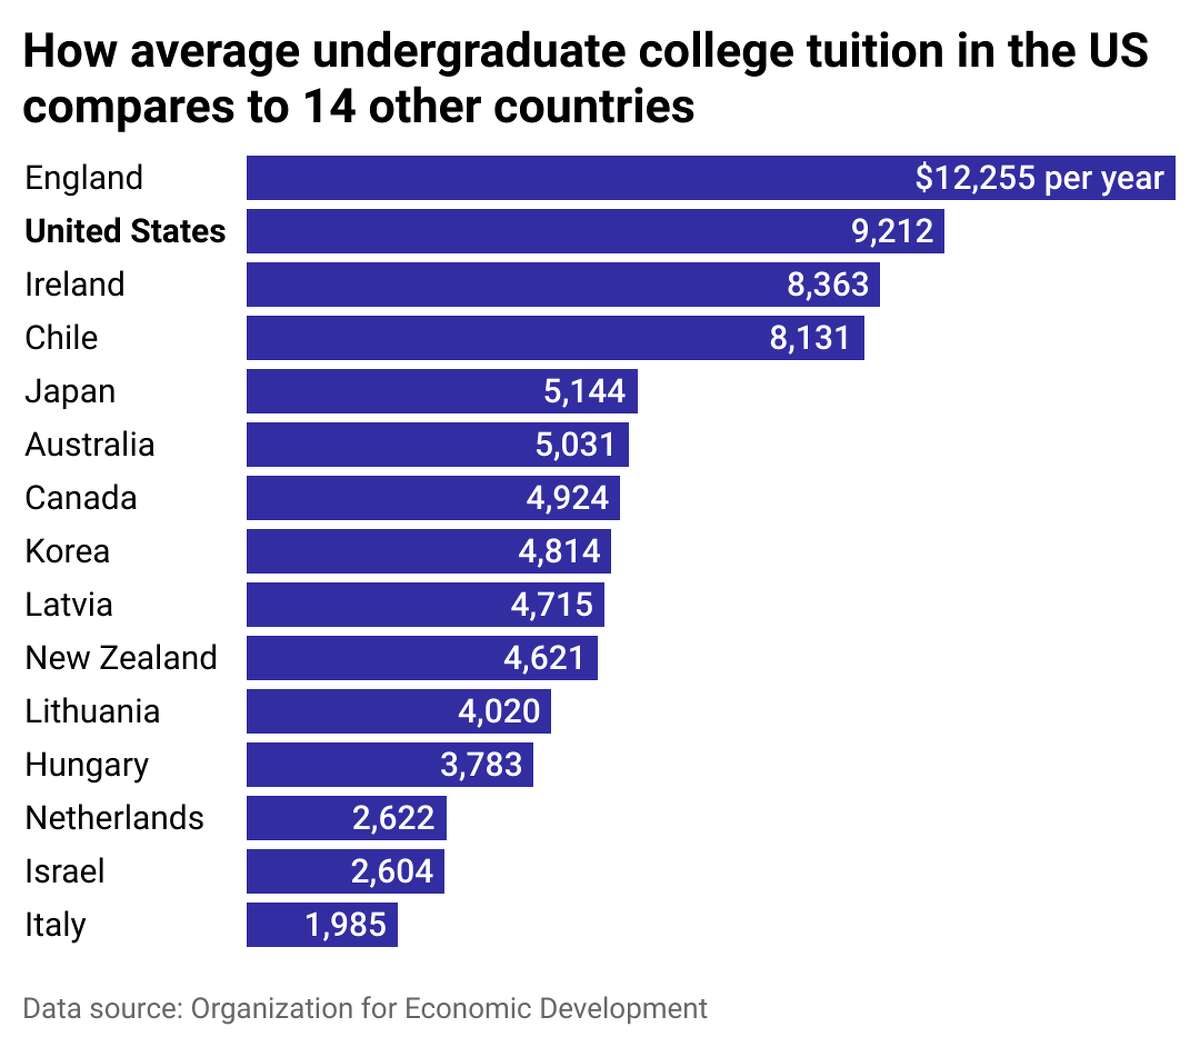 England and U.S. lead 12 nations for cost of bachelor's degree Among public institutions in OECD countries, about a quarter do not charge national students for undergraduate tuition, including Norway, Finland, Denmark, and Turkey. On the other end of the spectrum is England, where colleges are independently run, government-supported institutions that can come with higher price tags. In both England and U.S., at least 80% of students receive some form of financial support, which can range from grants, loans, and scholarships.